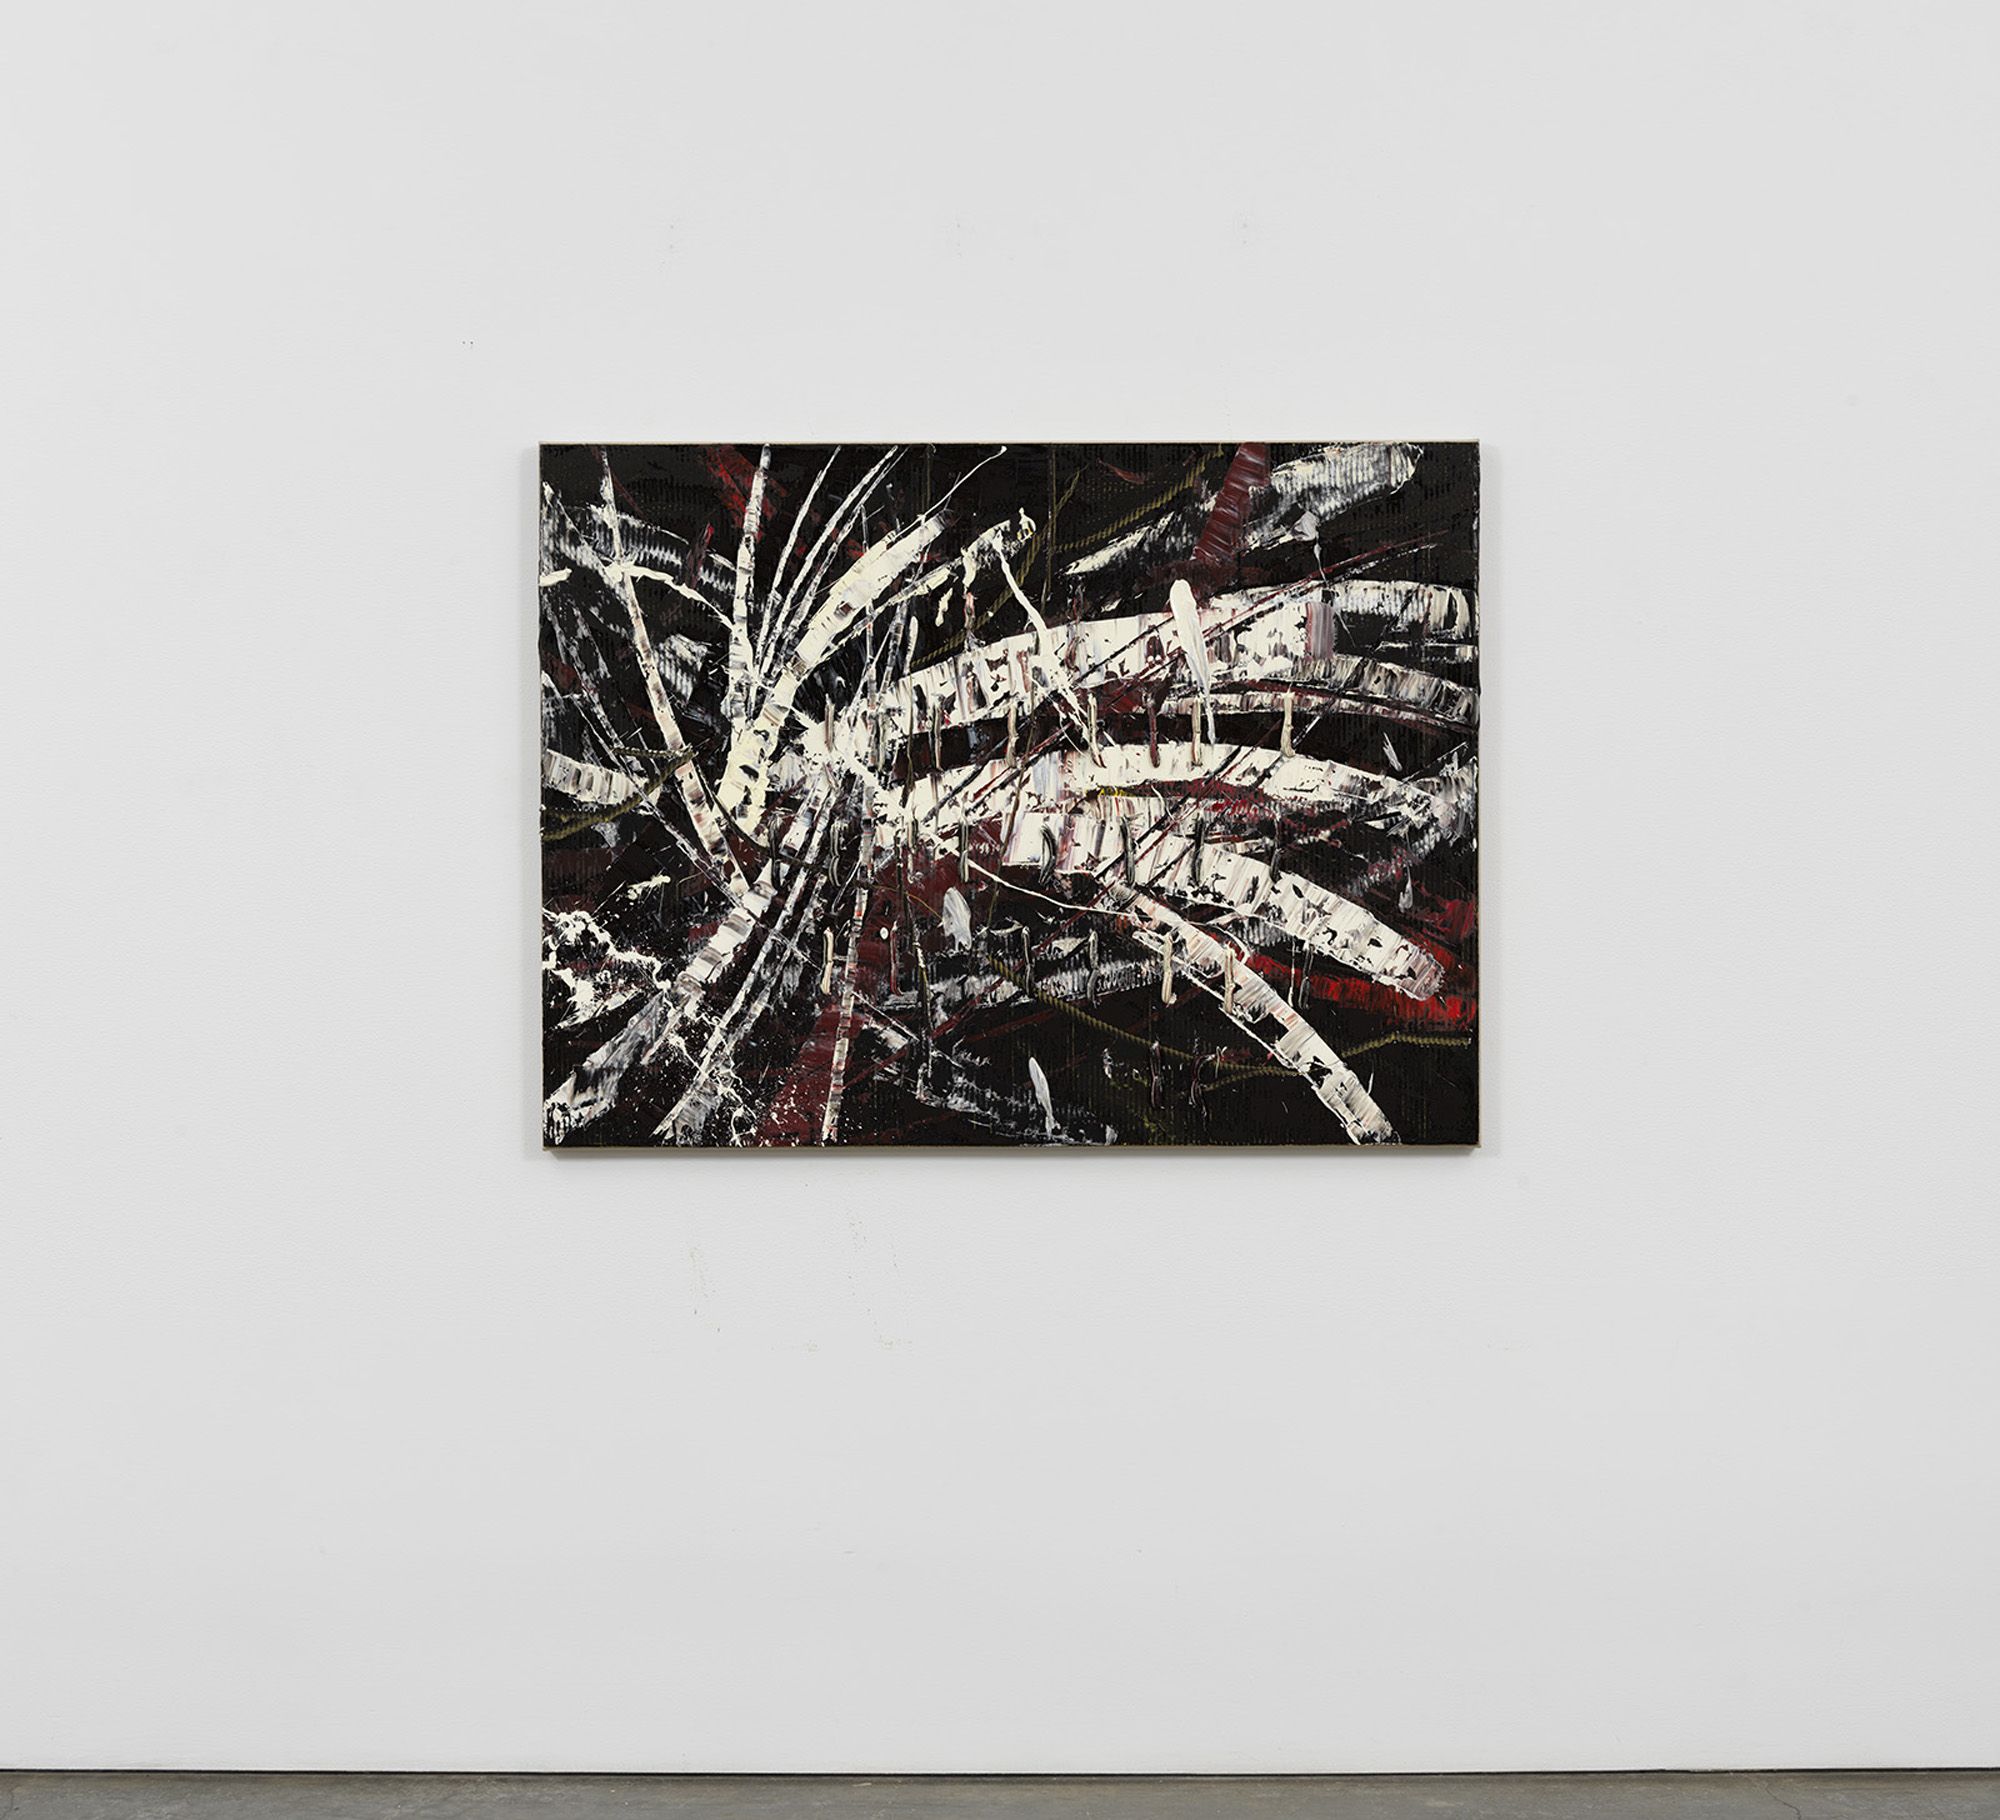 ICE AND FIRE: A BENEFIT EXHIBITION IN THREE PARTS | Mark Grotjahn